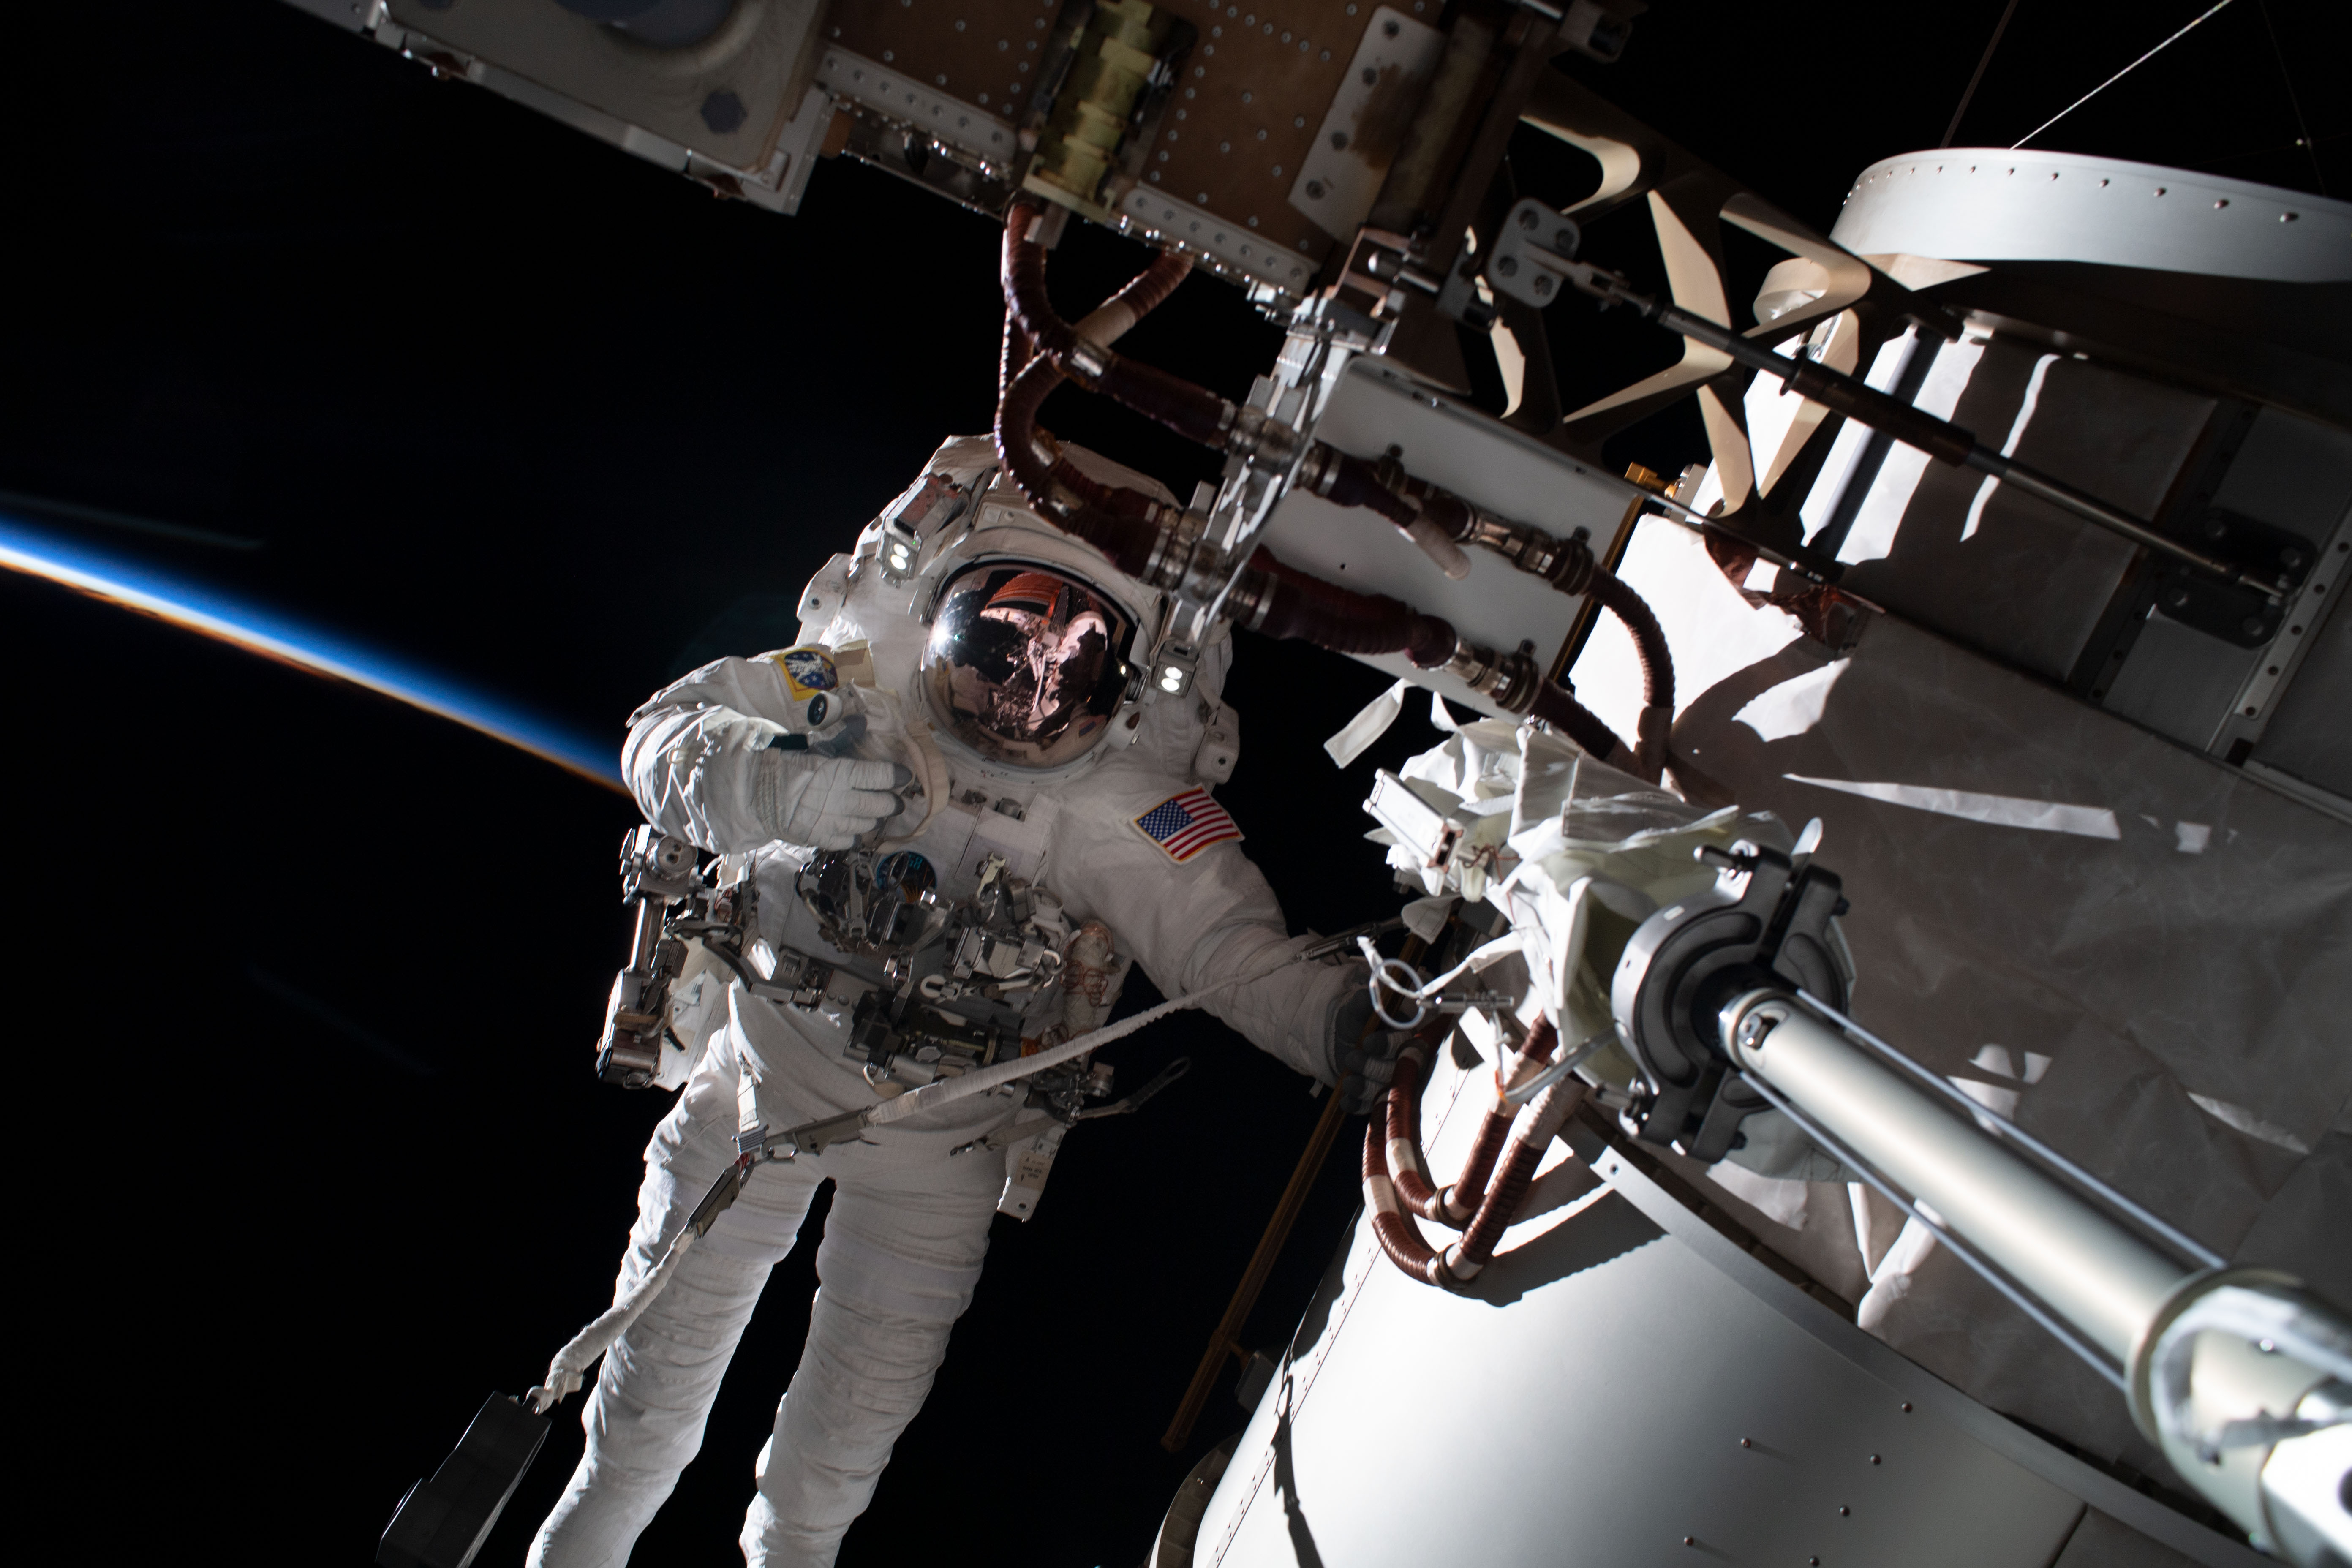 (iss068e022435) NASA astronaut and Expedition 68 Flight Engineer Frank Rubio is pictured during a spacewalk tethered to the International Space Station's starboard truss structure.